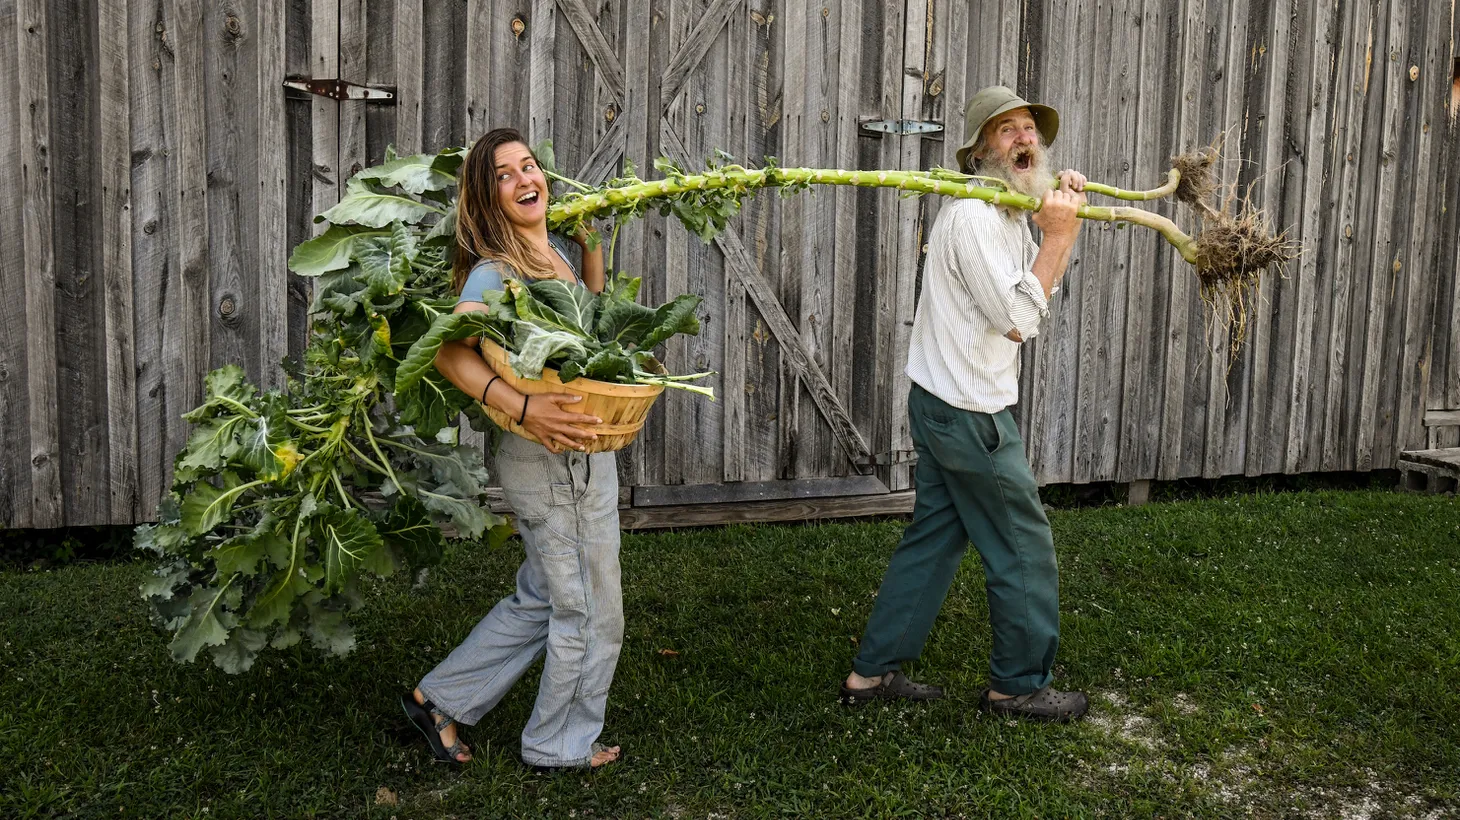 Shannie McCabe (left) and Dave Kaiser carry a Walking Stick kale plant.